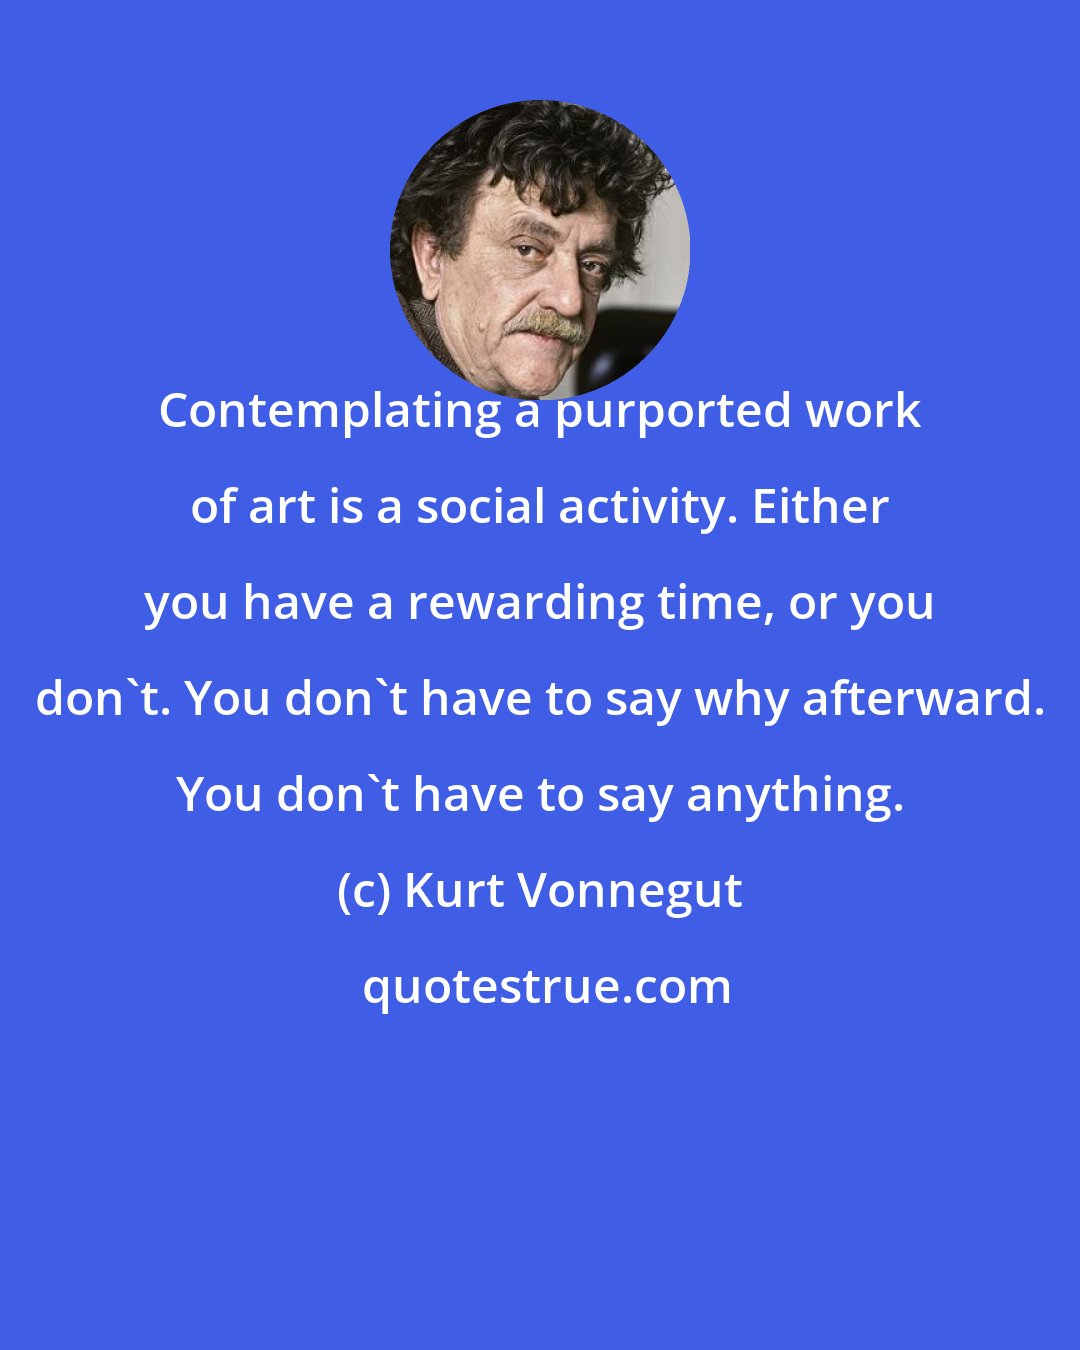 Kurt Vonnegut: Contemplating a purported work of art is a social activity. Either you have a rewarding time, or you don't. You don't have to say why afterward. You don't have to say anything.